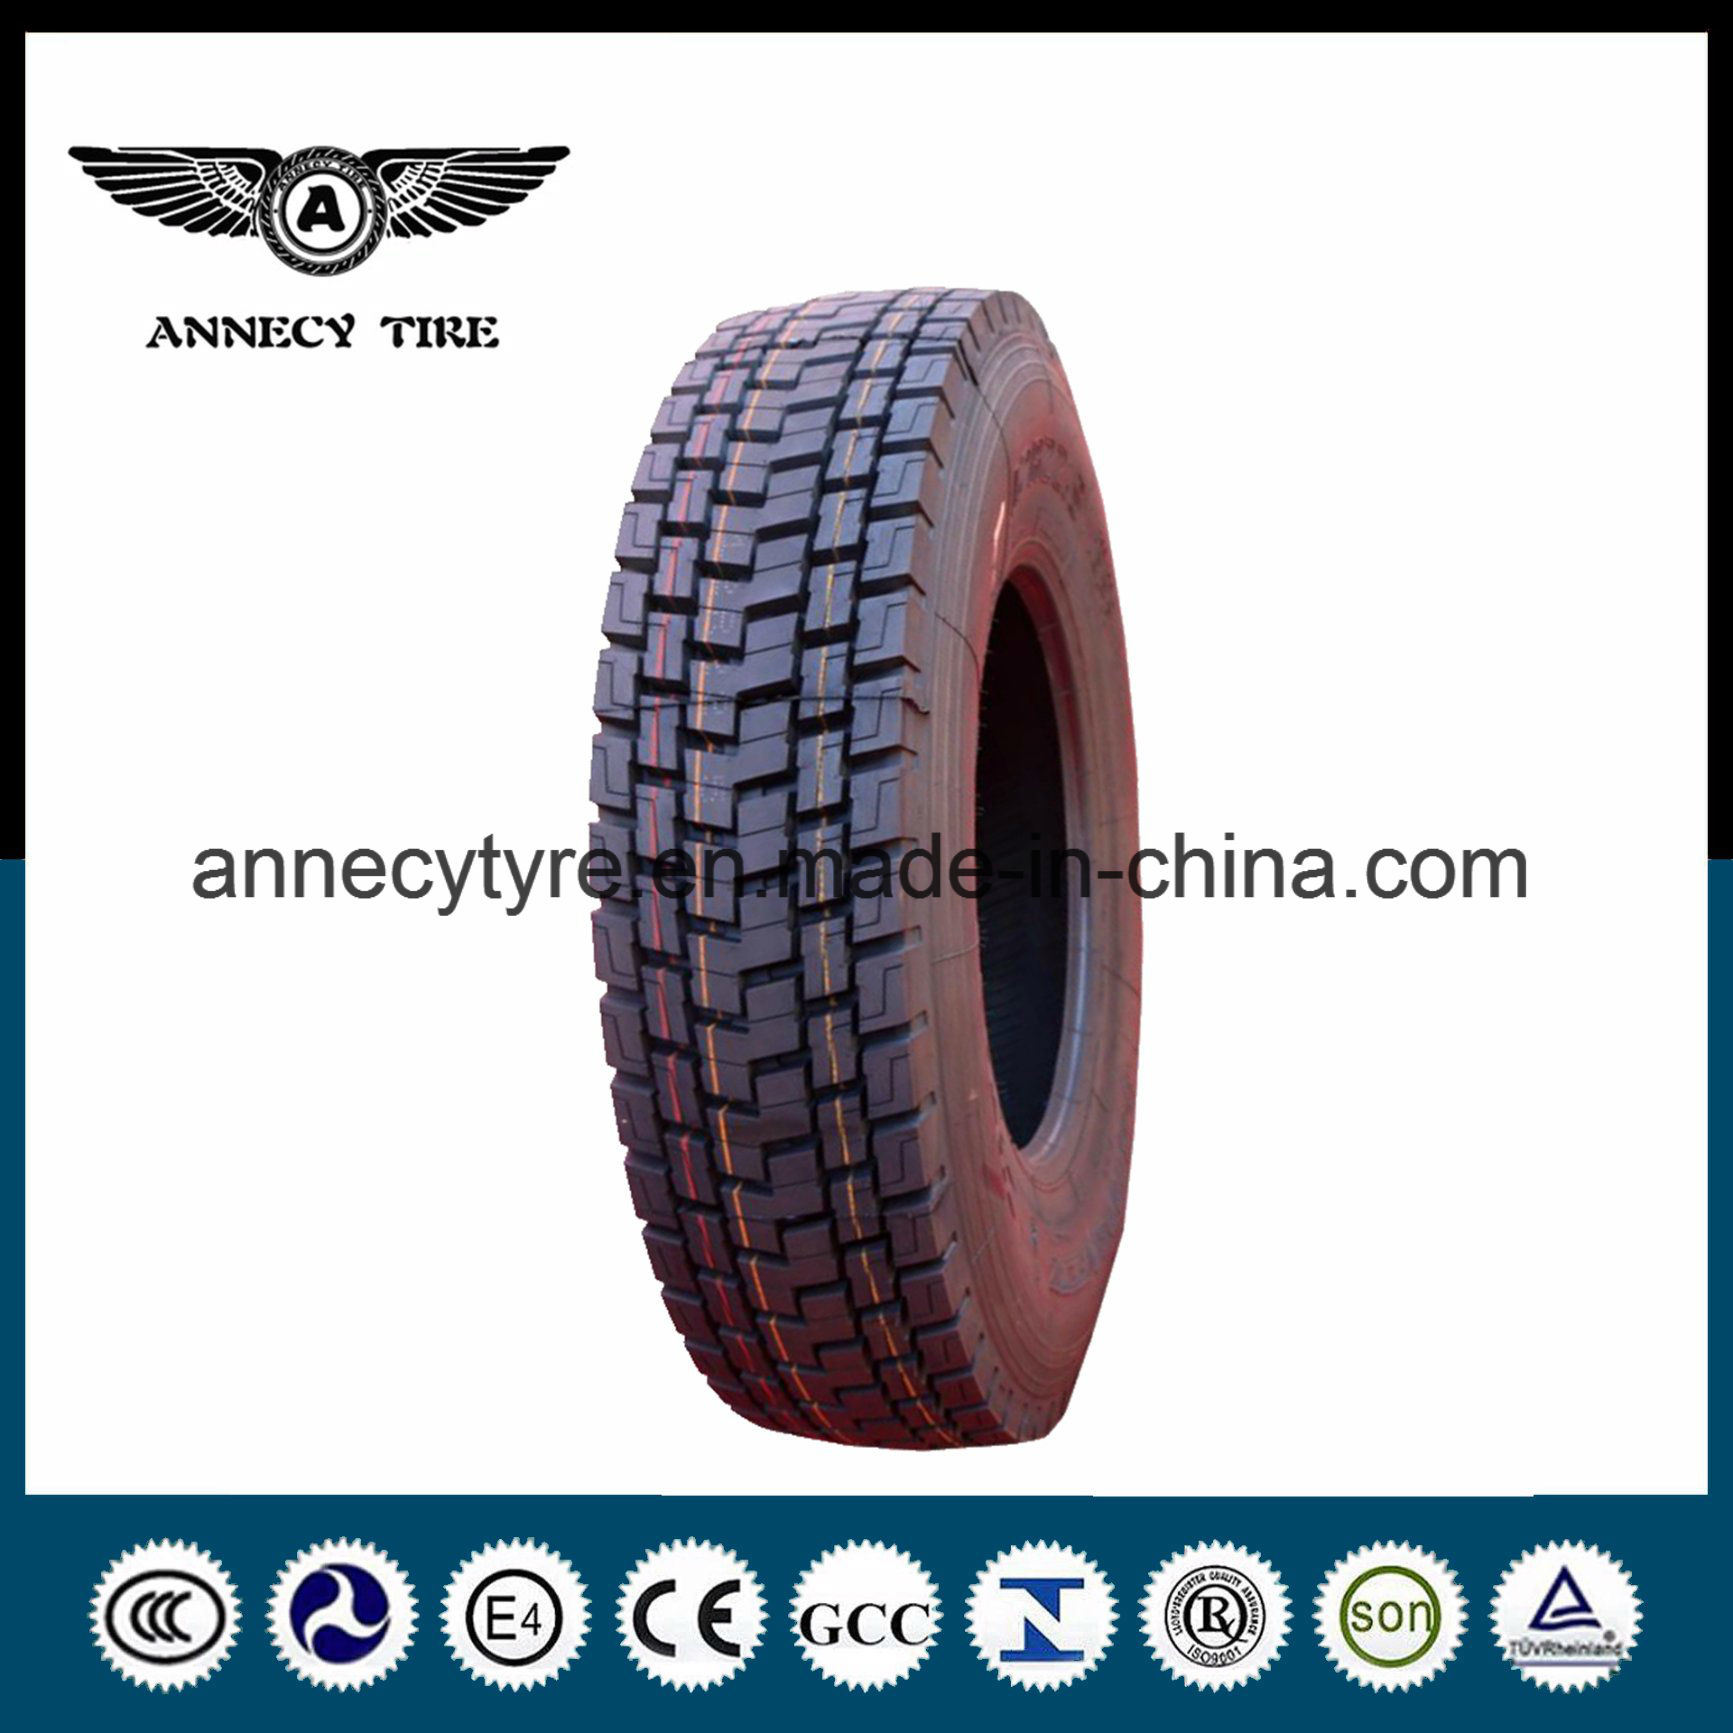 Radial Truck Tire/ Tyre 385/55r19.5 385/55r22.5 385/65r22.5